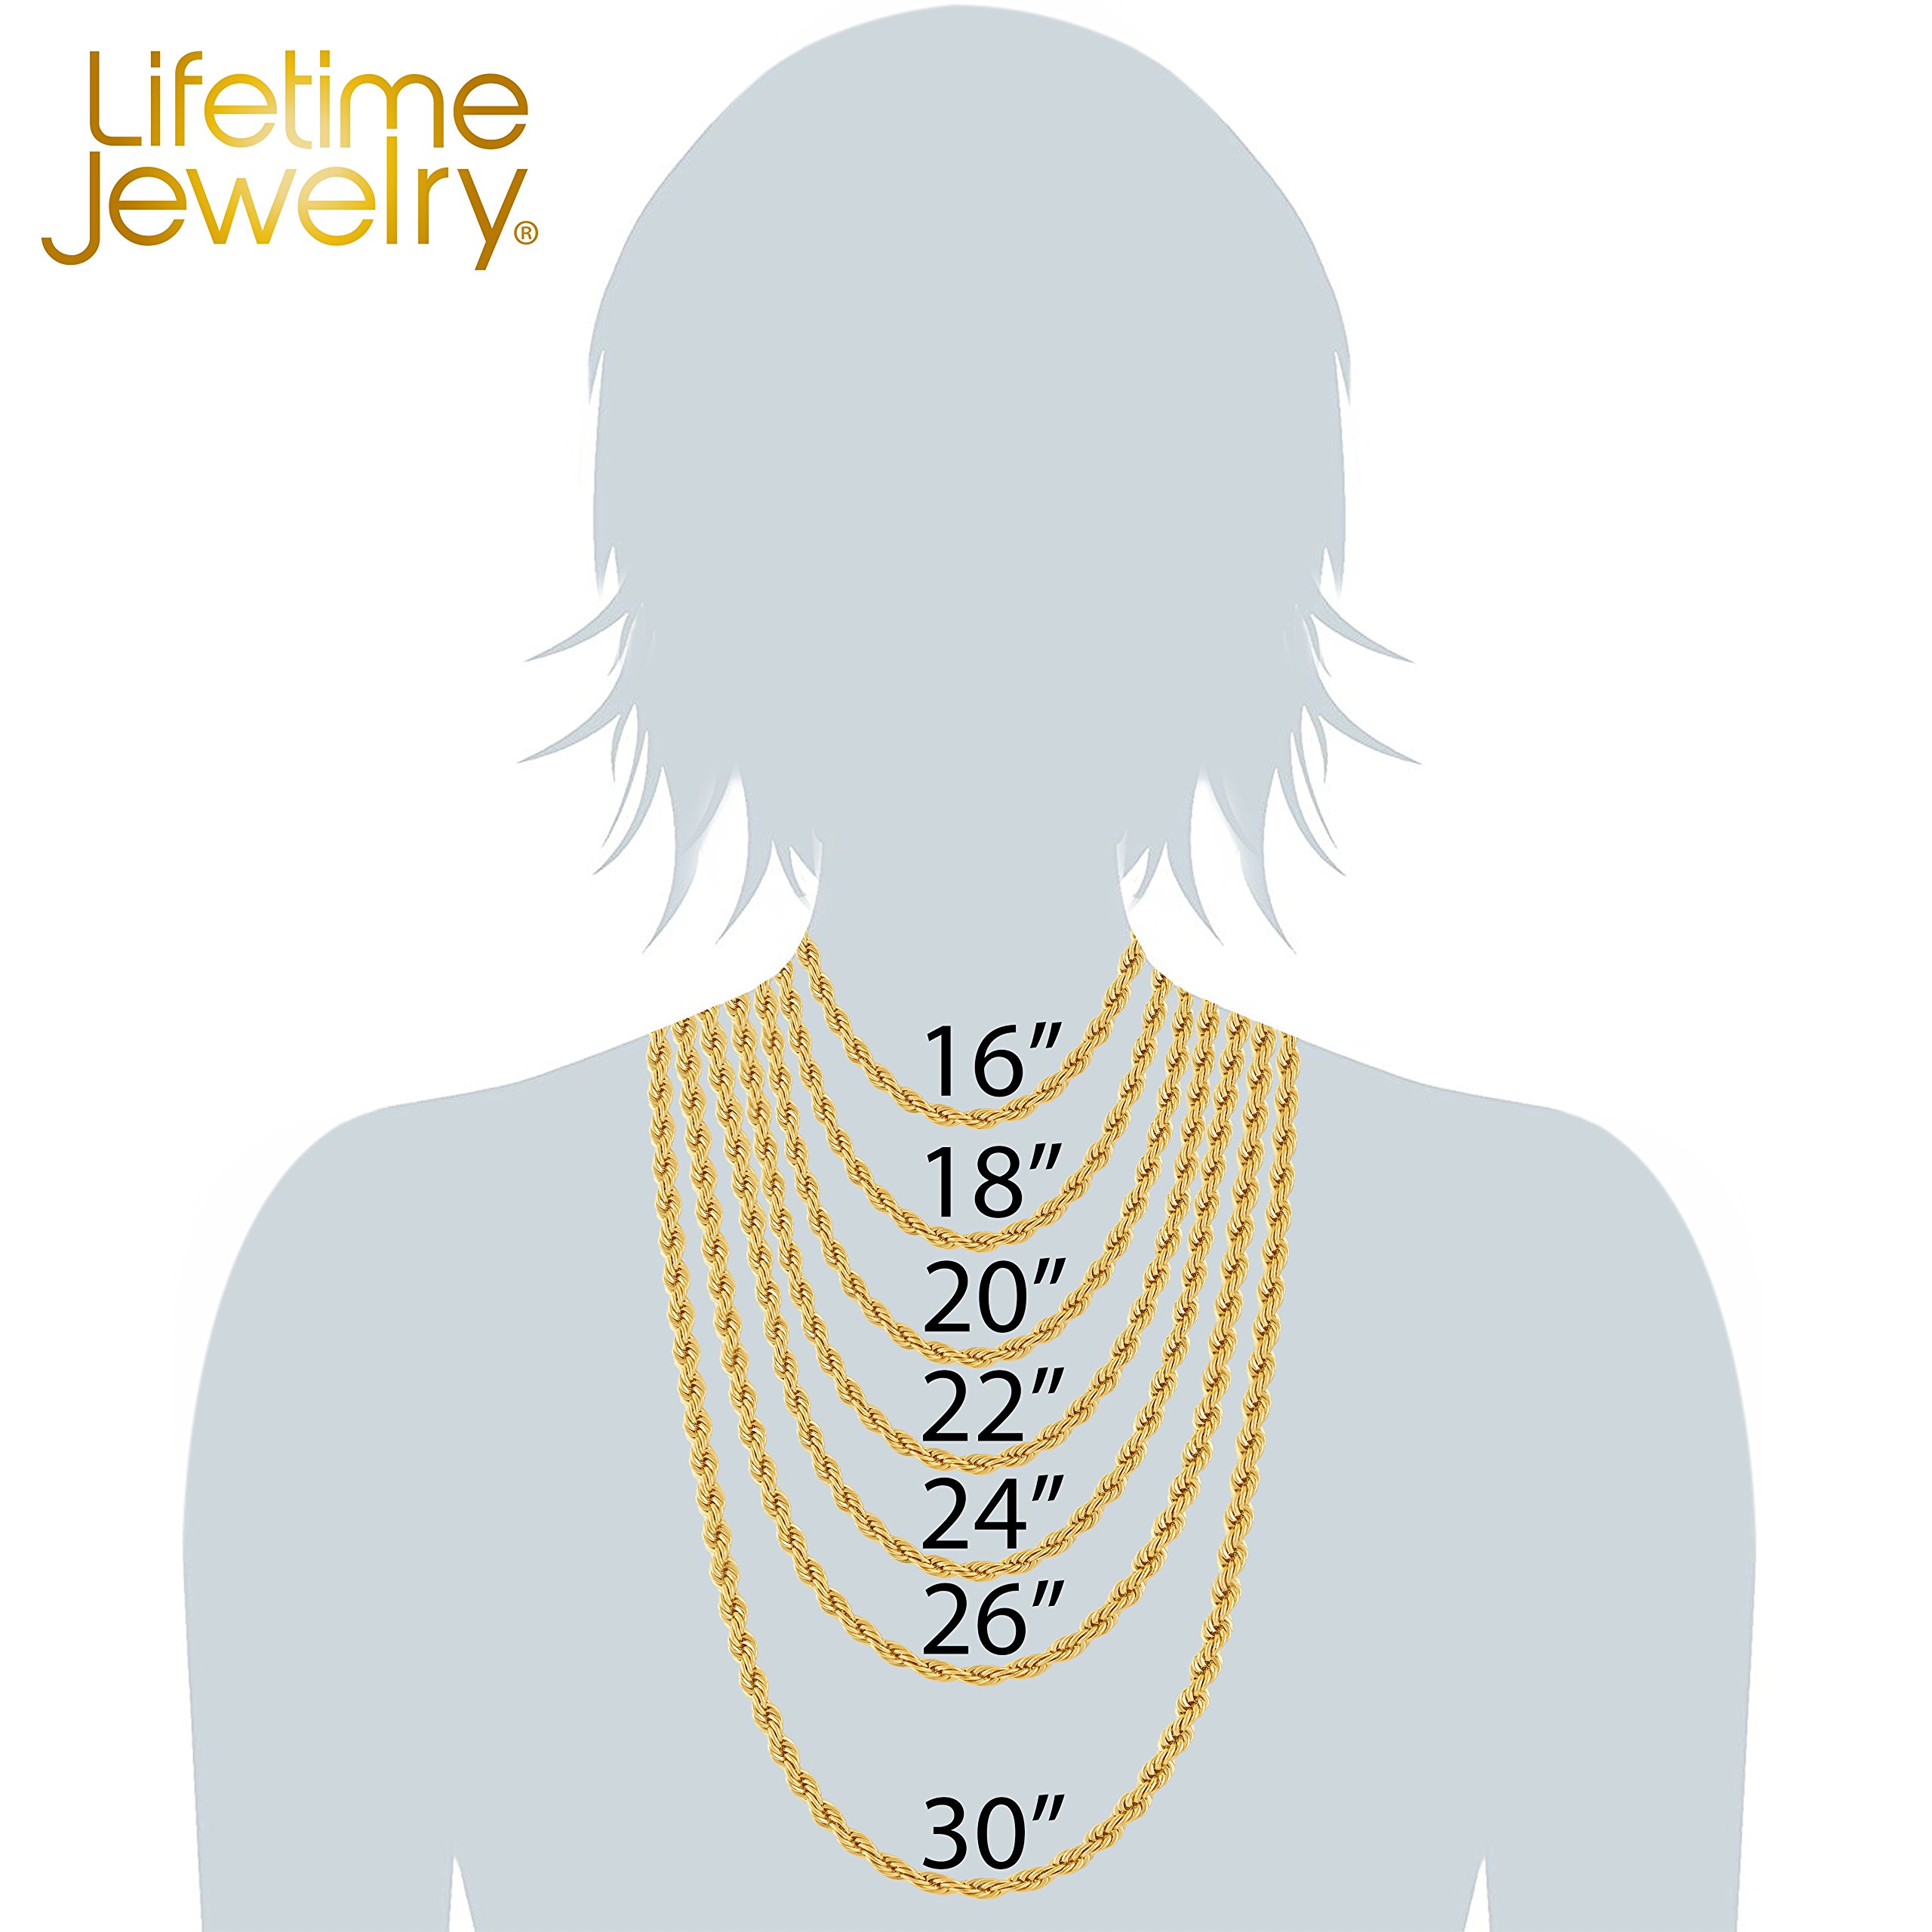 LIFETIME JEWELRY 5mm Rope Chain Necklace 24k Real Gold Plated for Men Women Teen